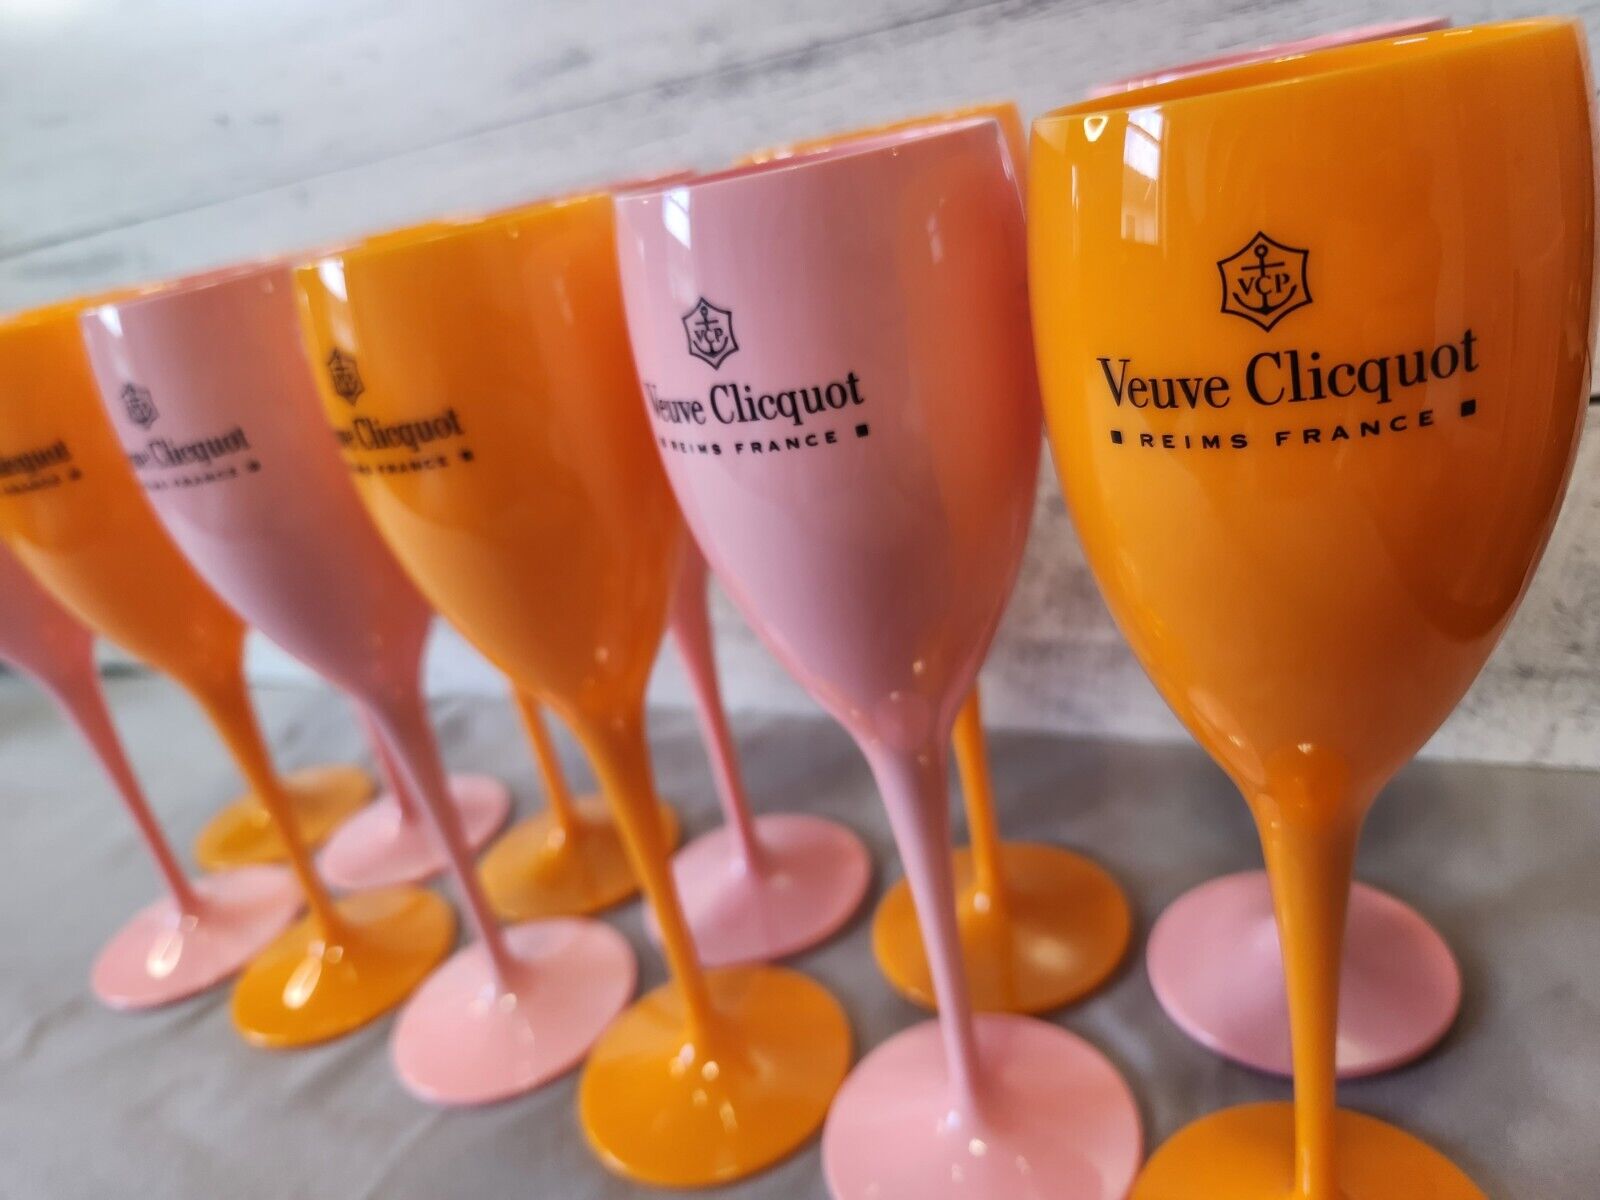 VEUVE CLICQUOT ORANGE AND PINK ROSE ACRYLIC CHAMPAGNE FLUTES 12 TOTAL NEW